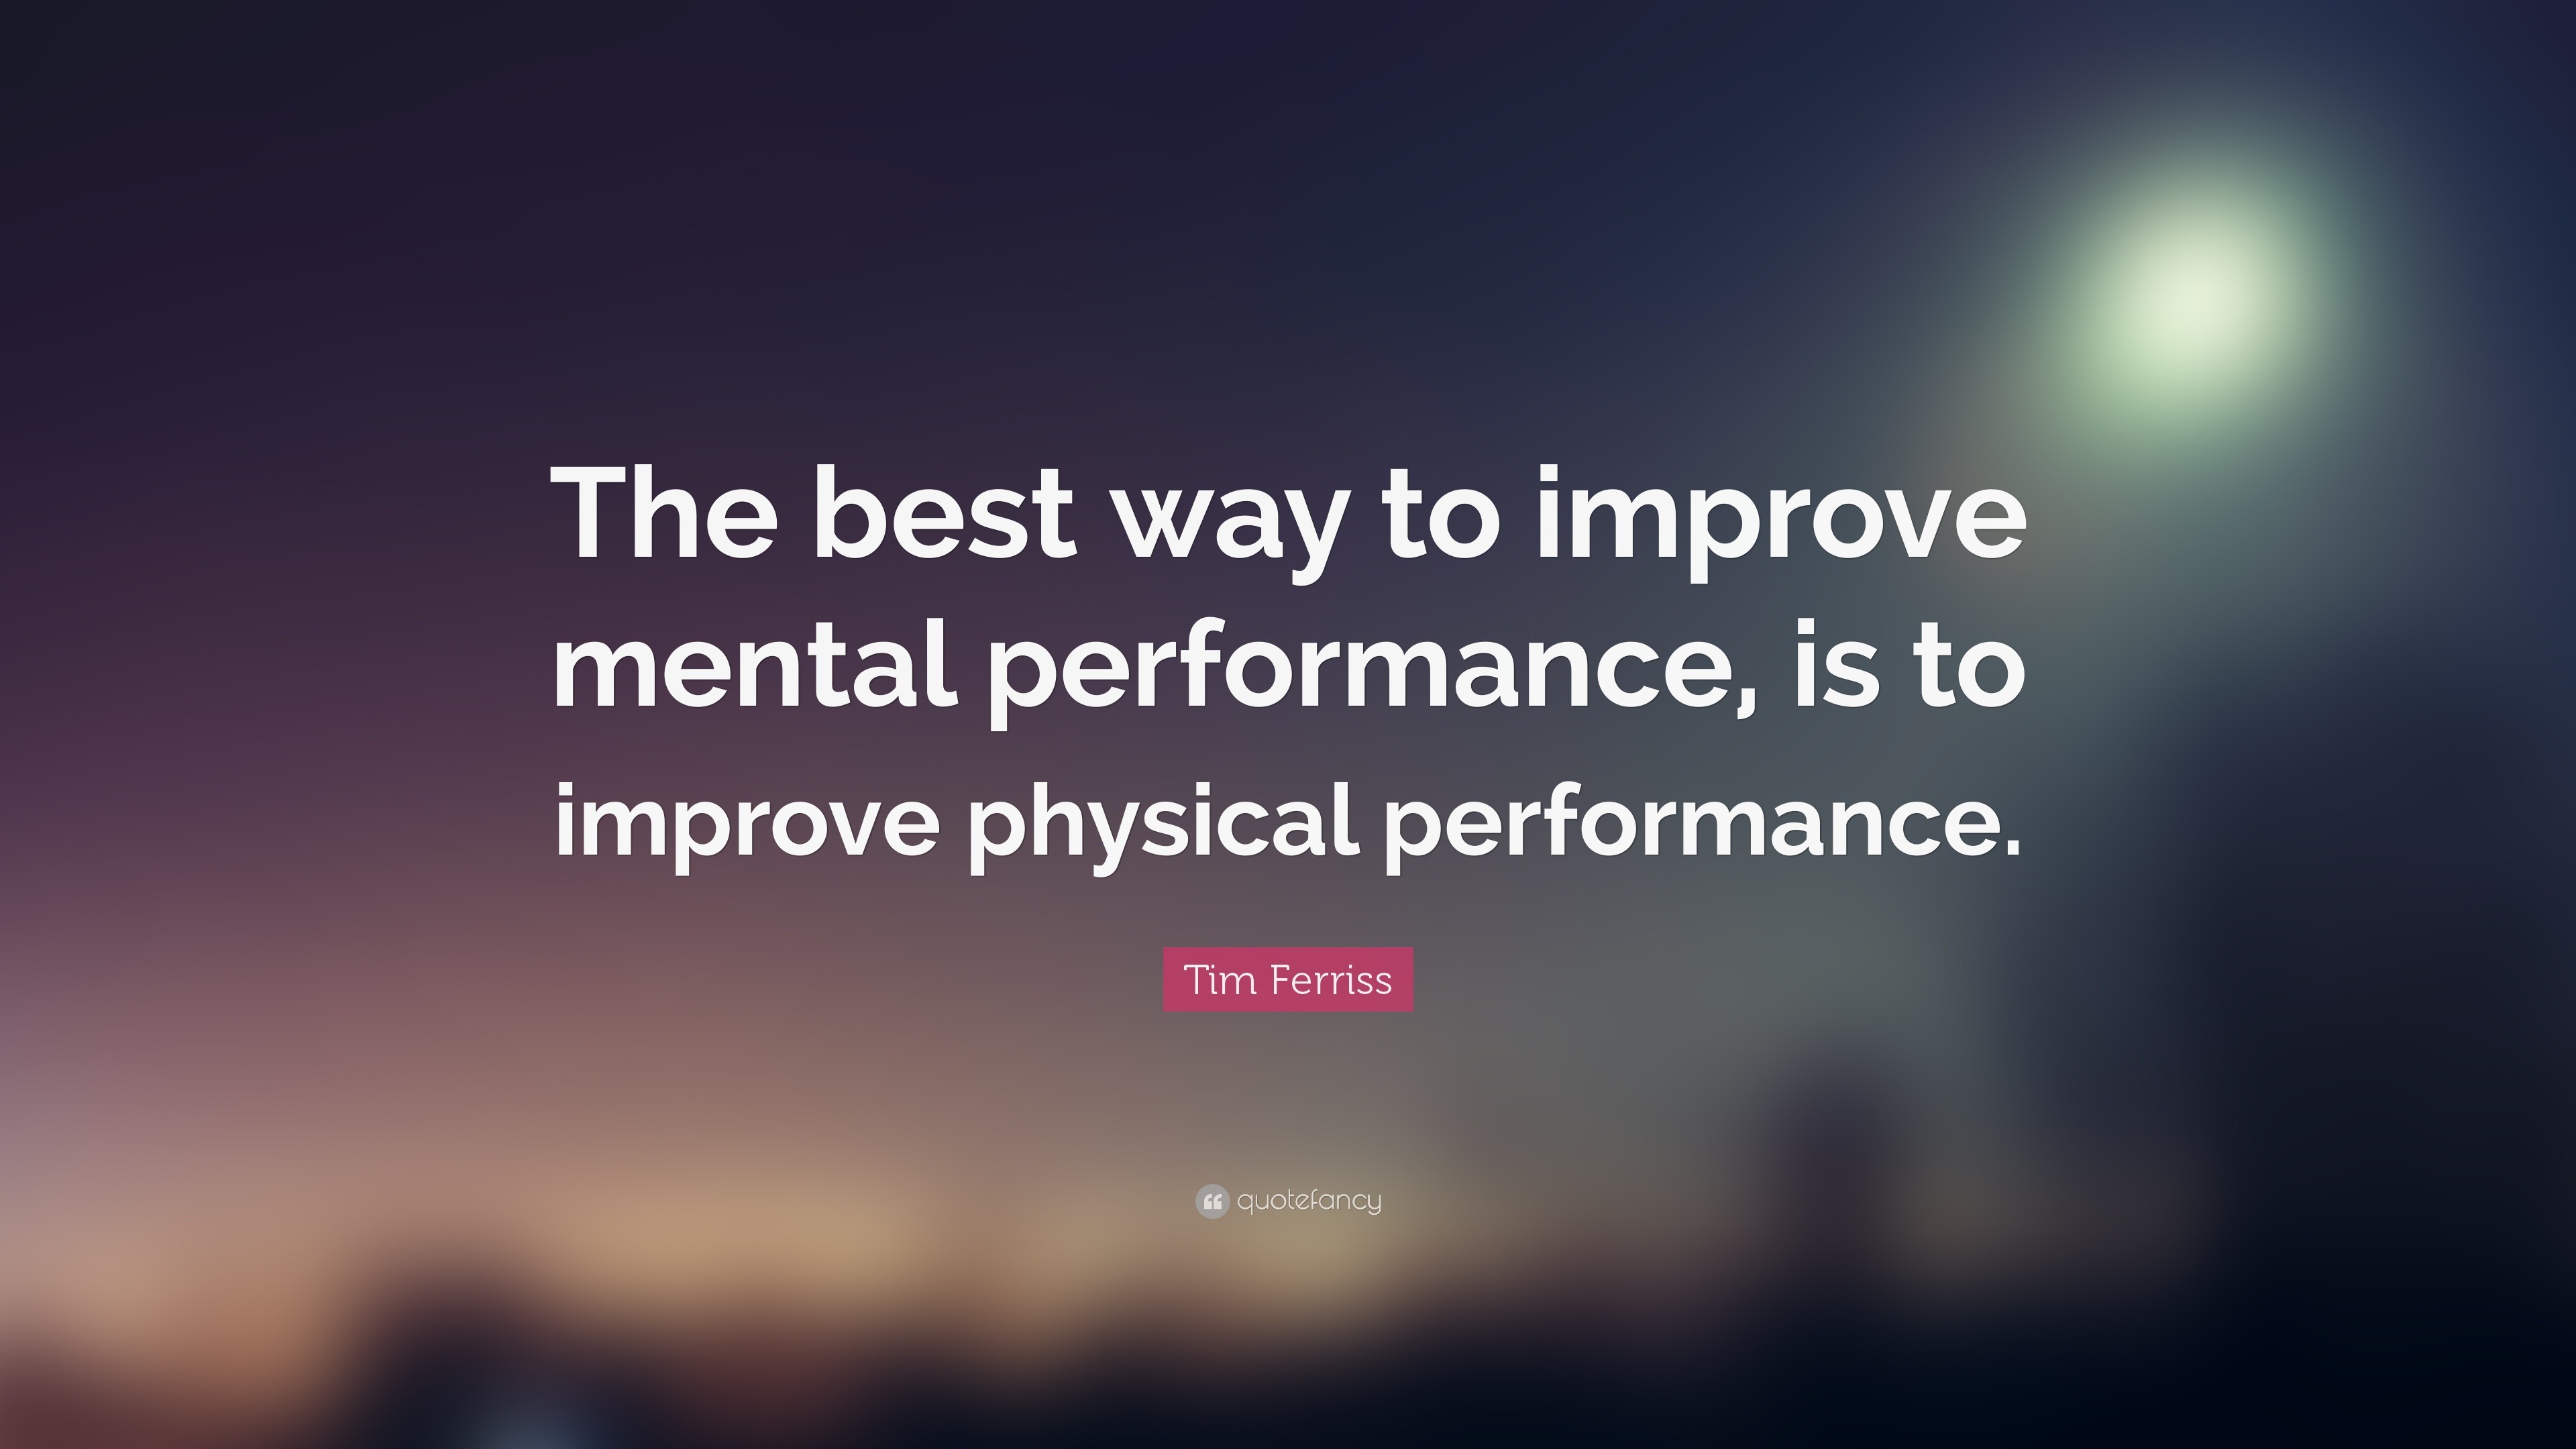 outstanding performance quotes